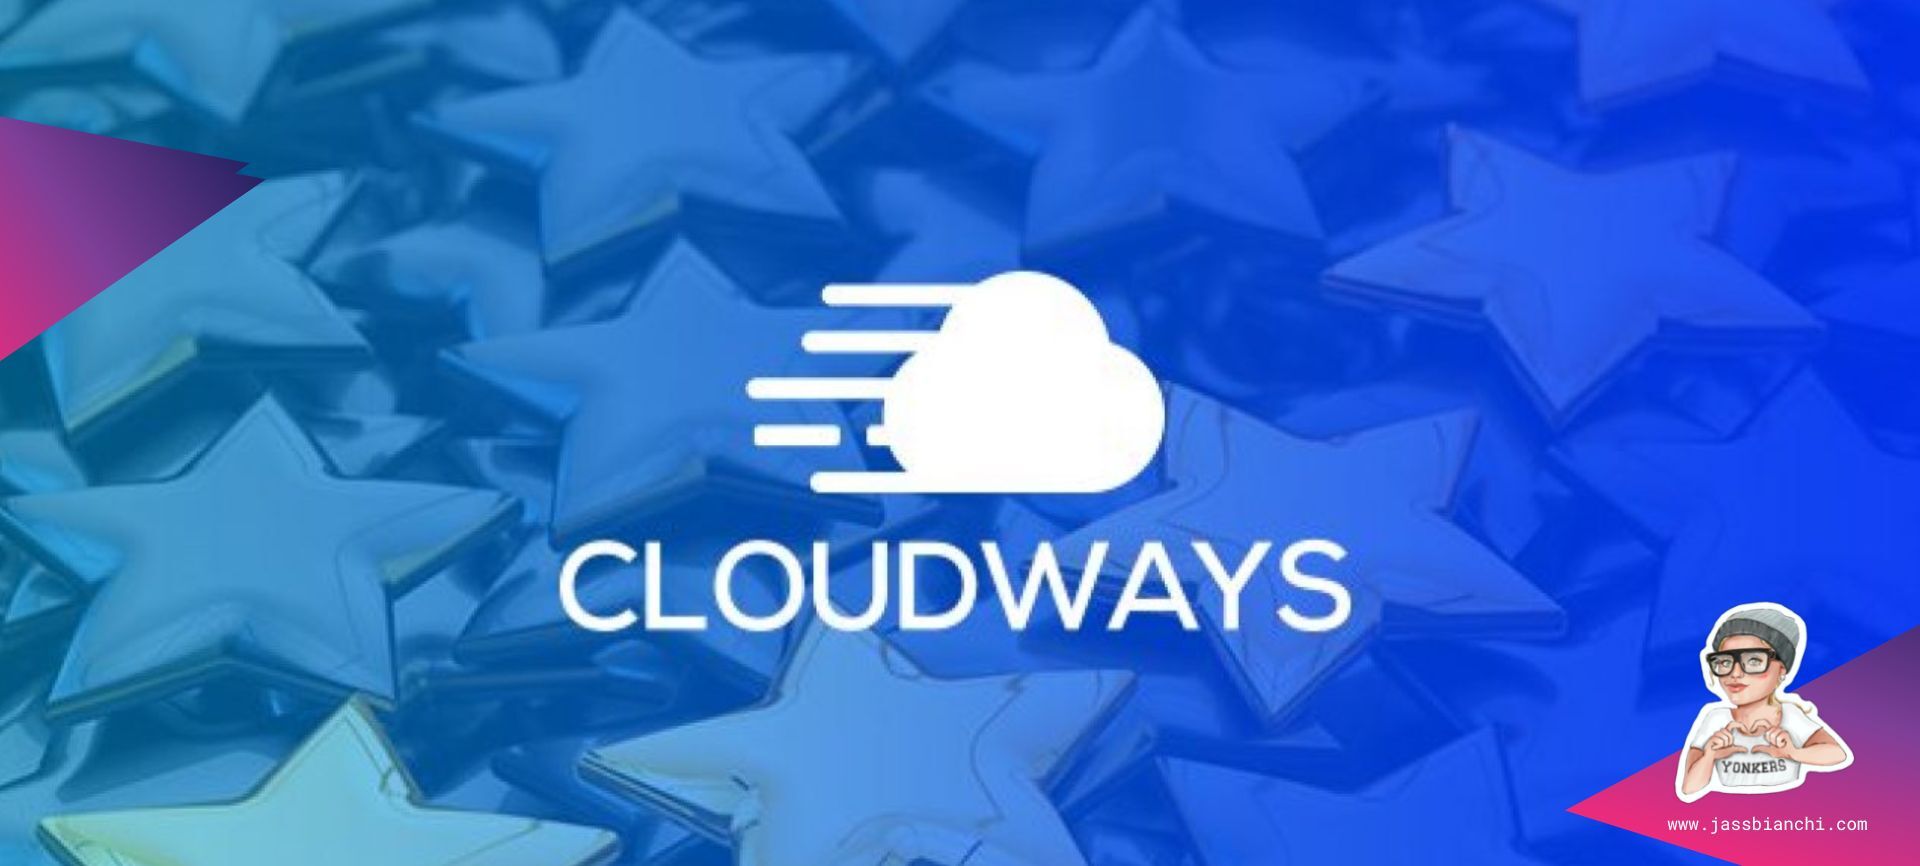 Getting Started with Cloudways- How to Choose the Best Web Hosting Company for Your Small Business